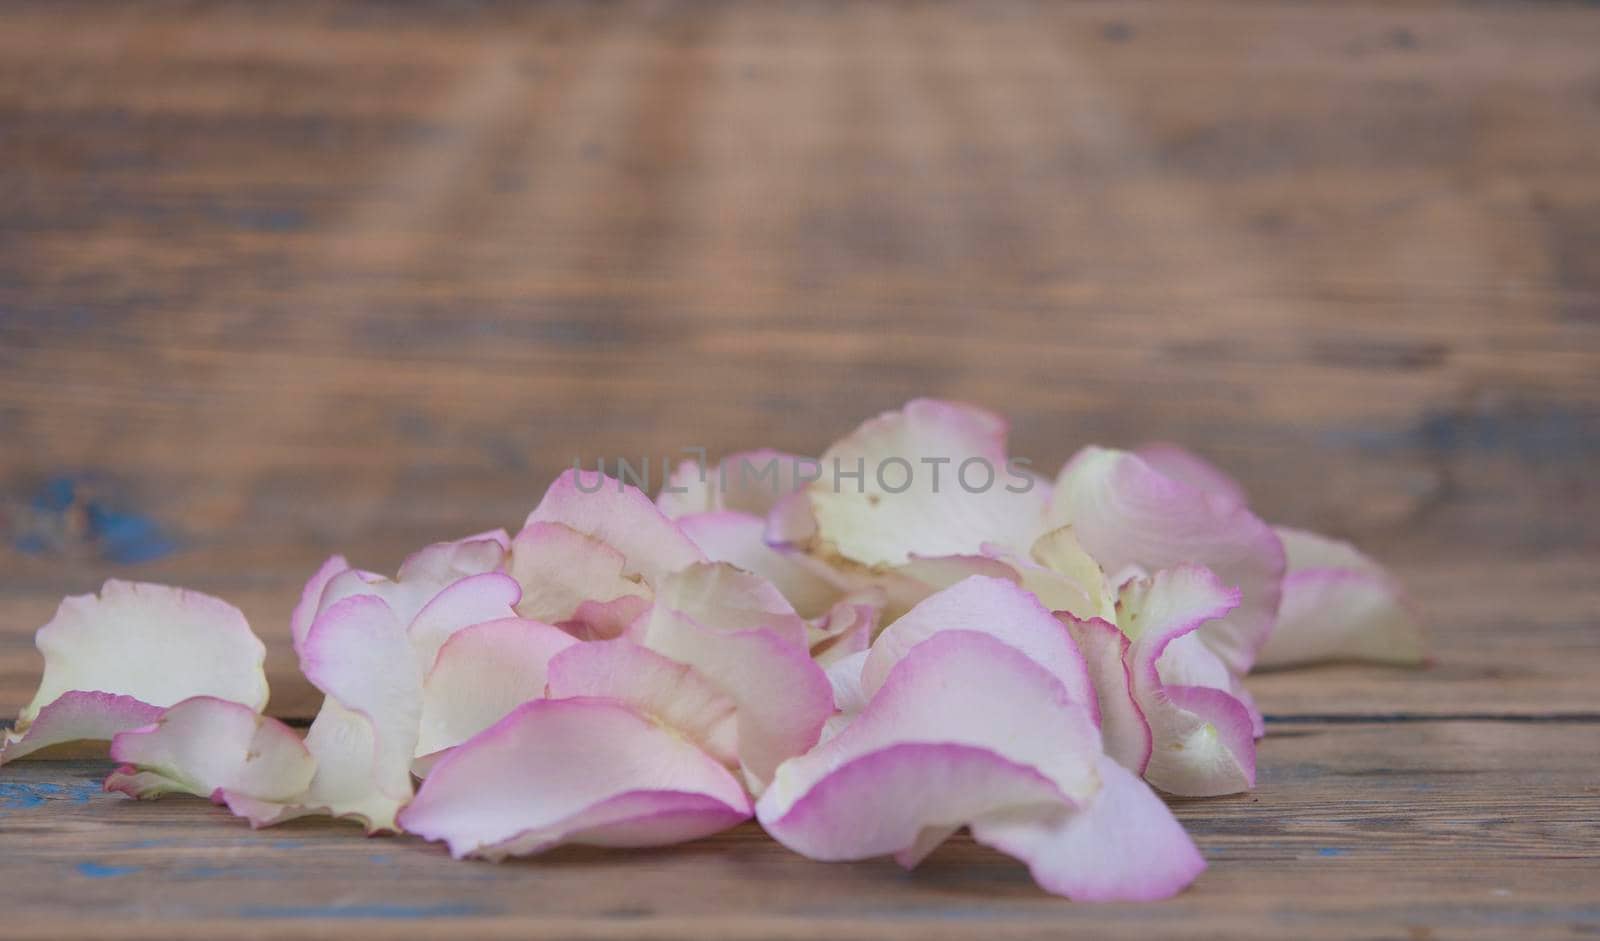 Rose petals on white wooden background.